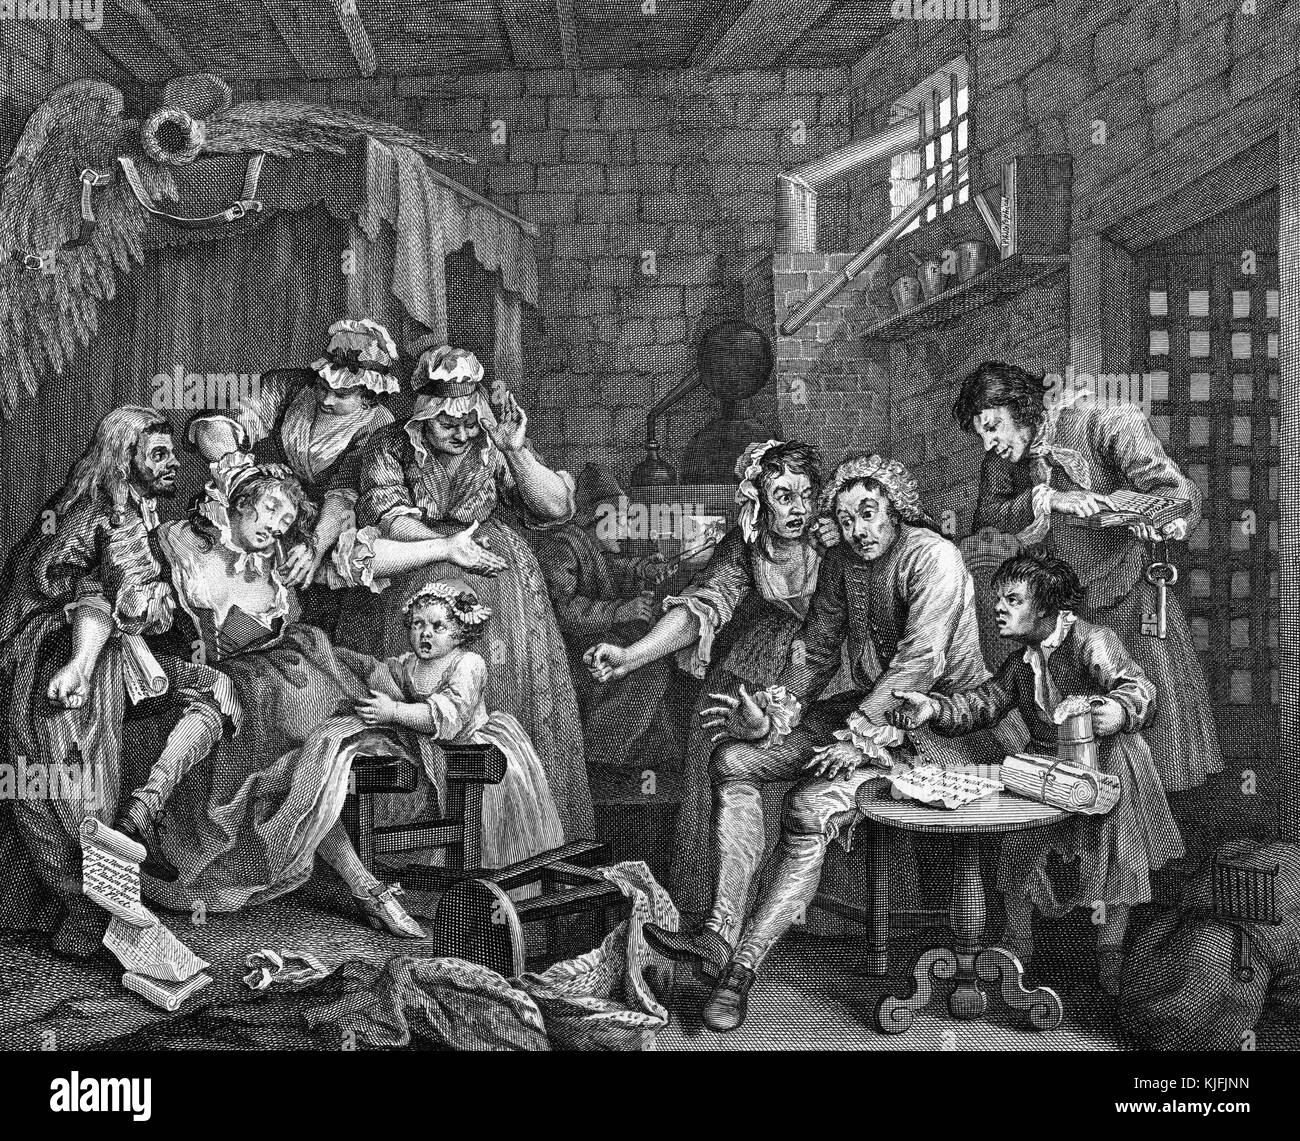 Etching and engraving on paper, titled, 'A Rake's Progress, Plate 7, The Rake, Tom Rakewell sits dumbfounded in a debtor's prison', depicting a group of people in a room, some children, a woman being awakened with salts after having fainted, by William Hogarth, 1735. From the New York Public Library. Stock Photo